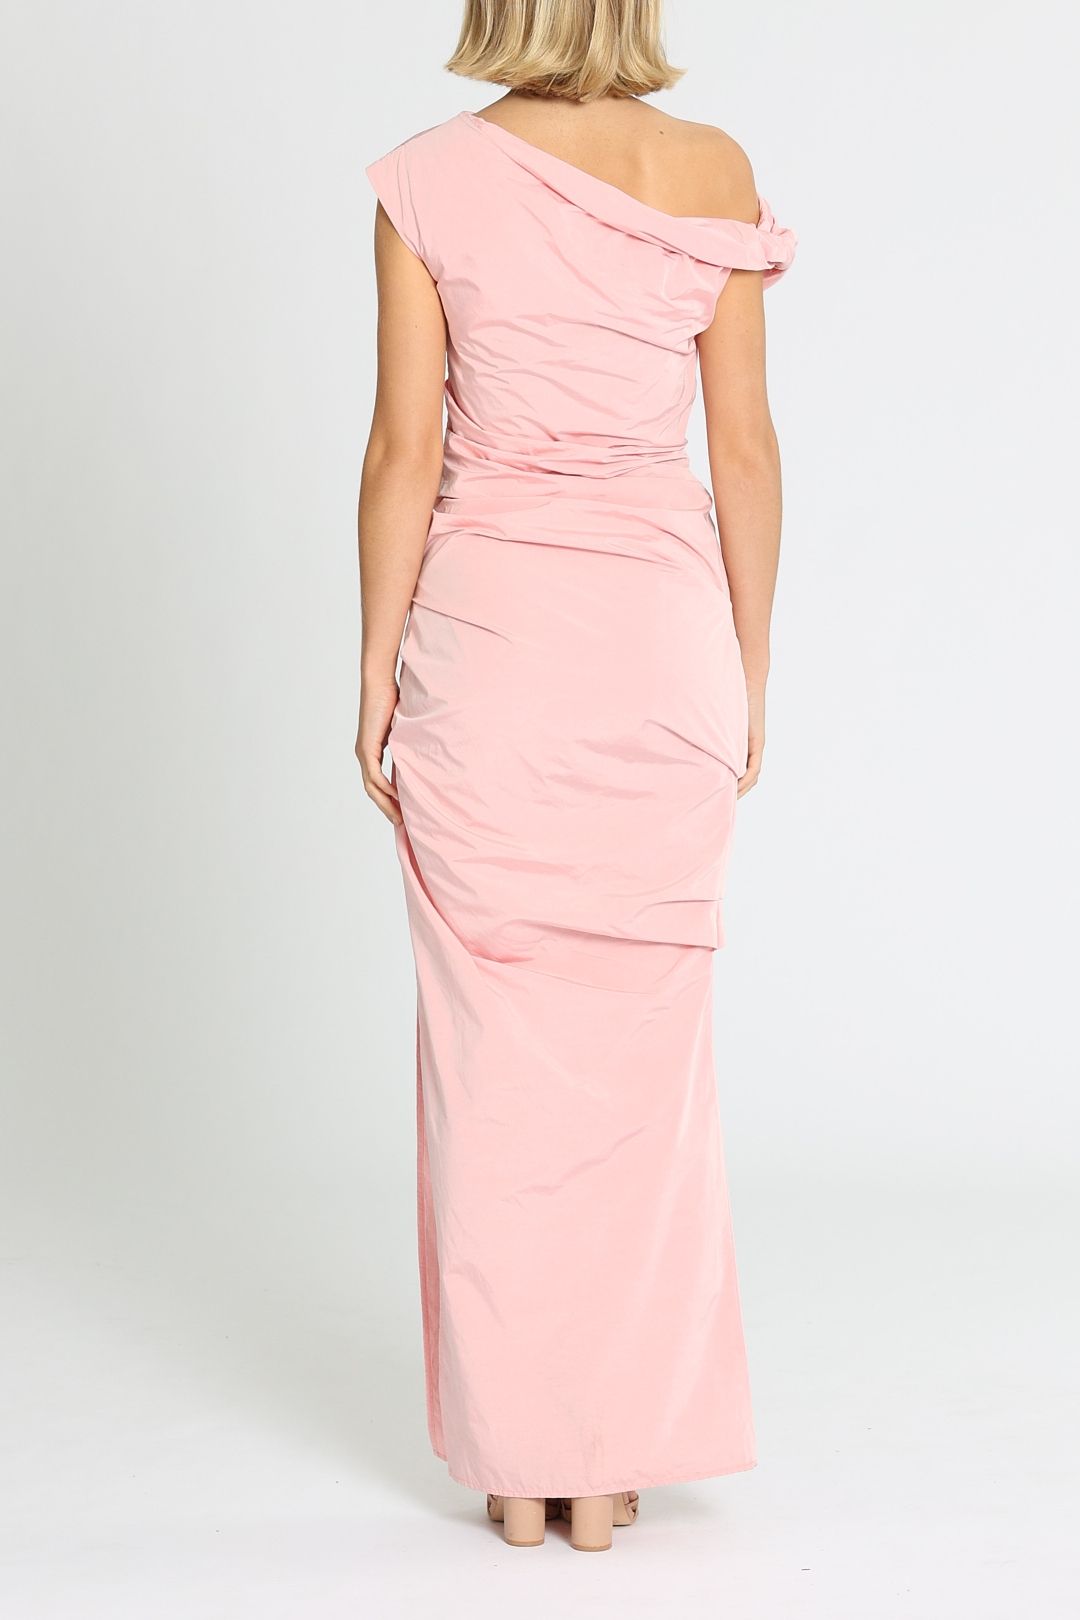 Paris Georgia Remmy Off The Shoulder Dress Shell Pink Ruched